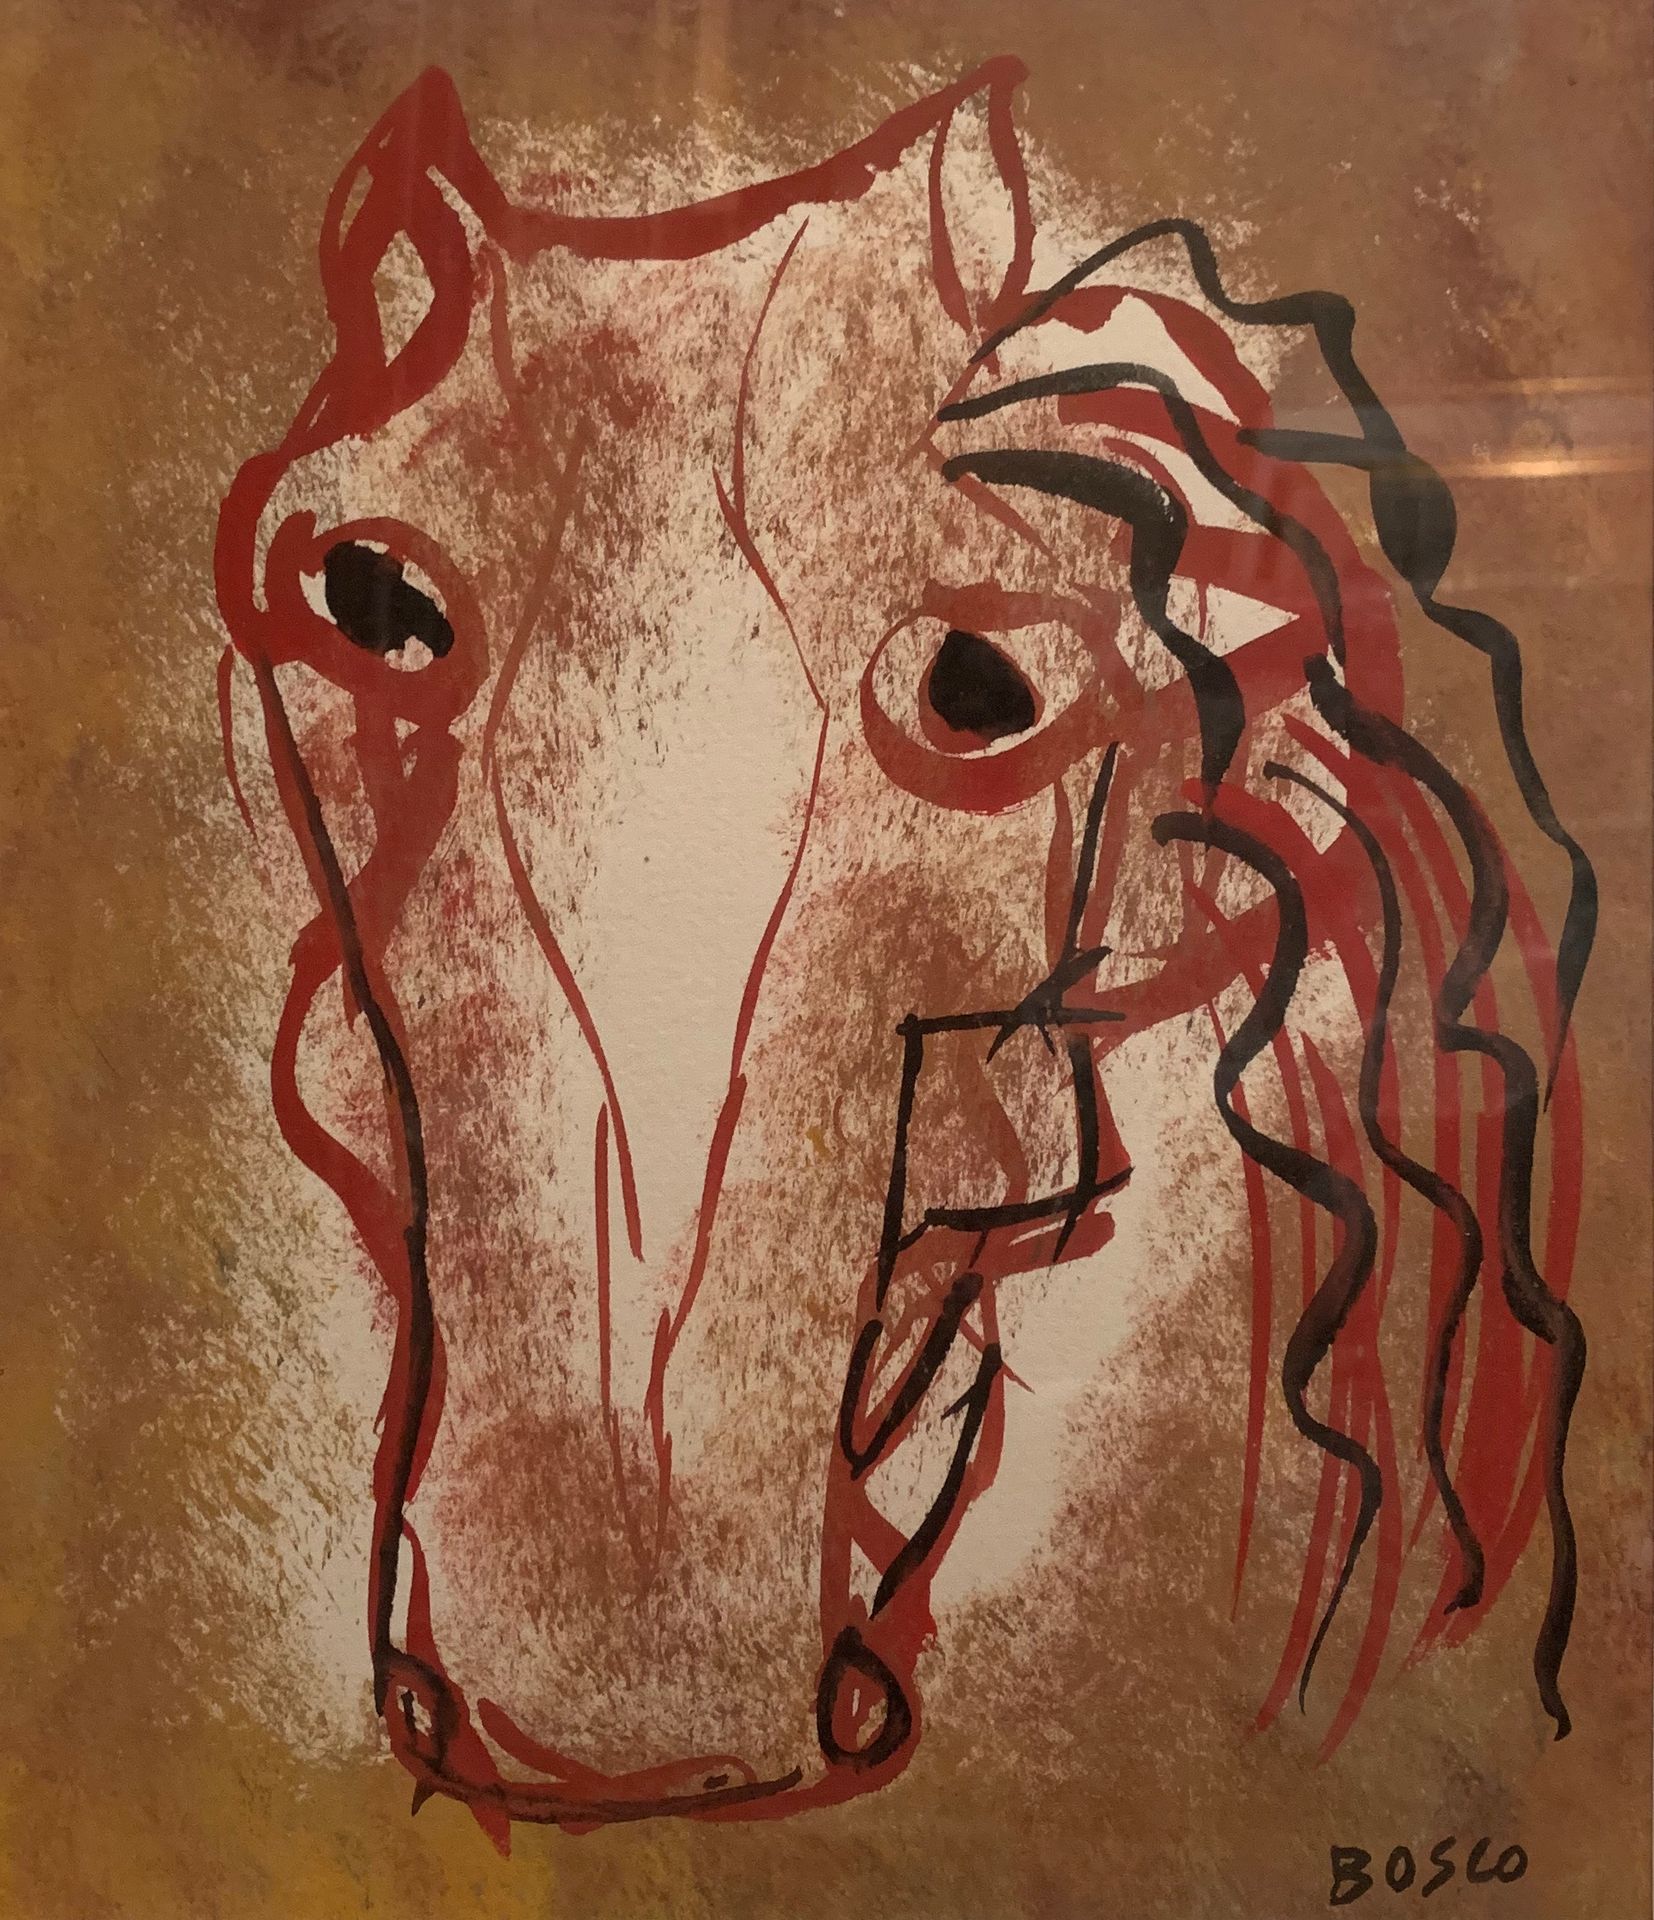 Null Pierre BOSCO (1909-1993)

Head of a horse

Watercolor signed lower right

2&hellip;